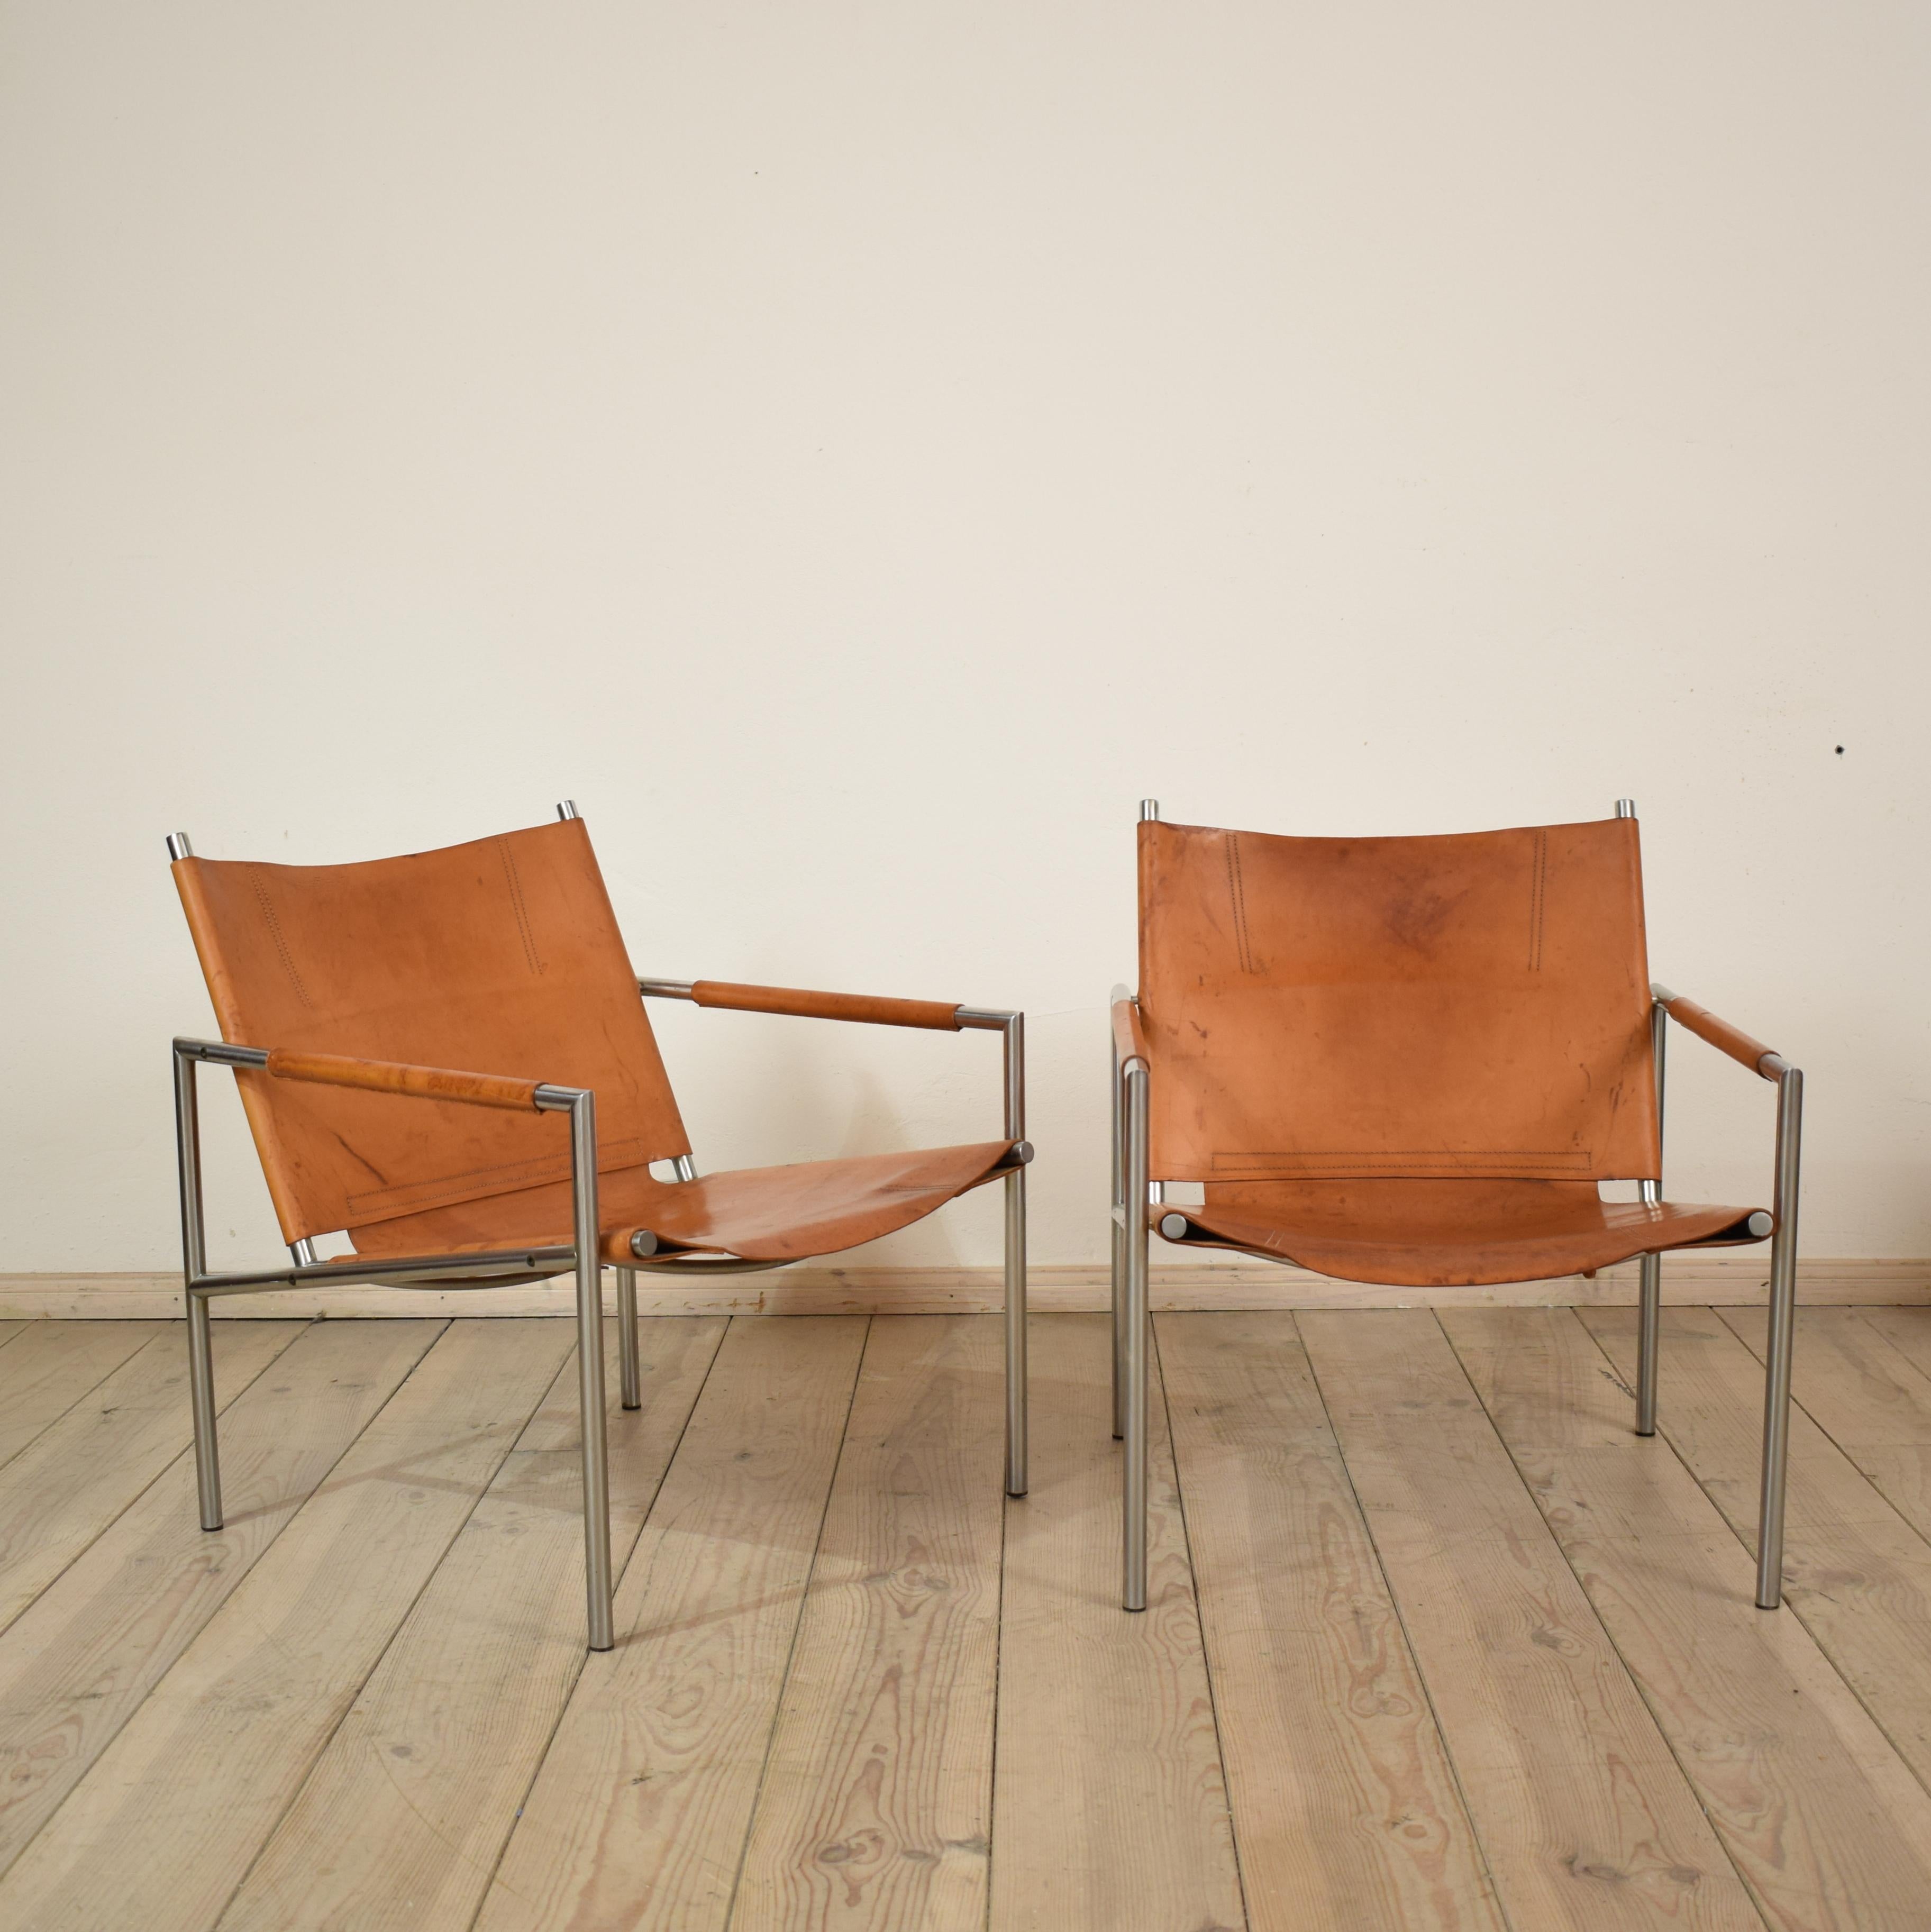 This elegant pair of lounge chairs by Martin Visser where produced by for 't Spectrum Bergeijk in the late 1960s. The model is 